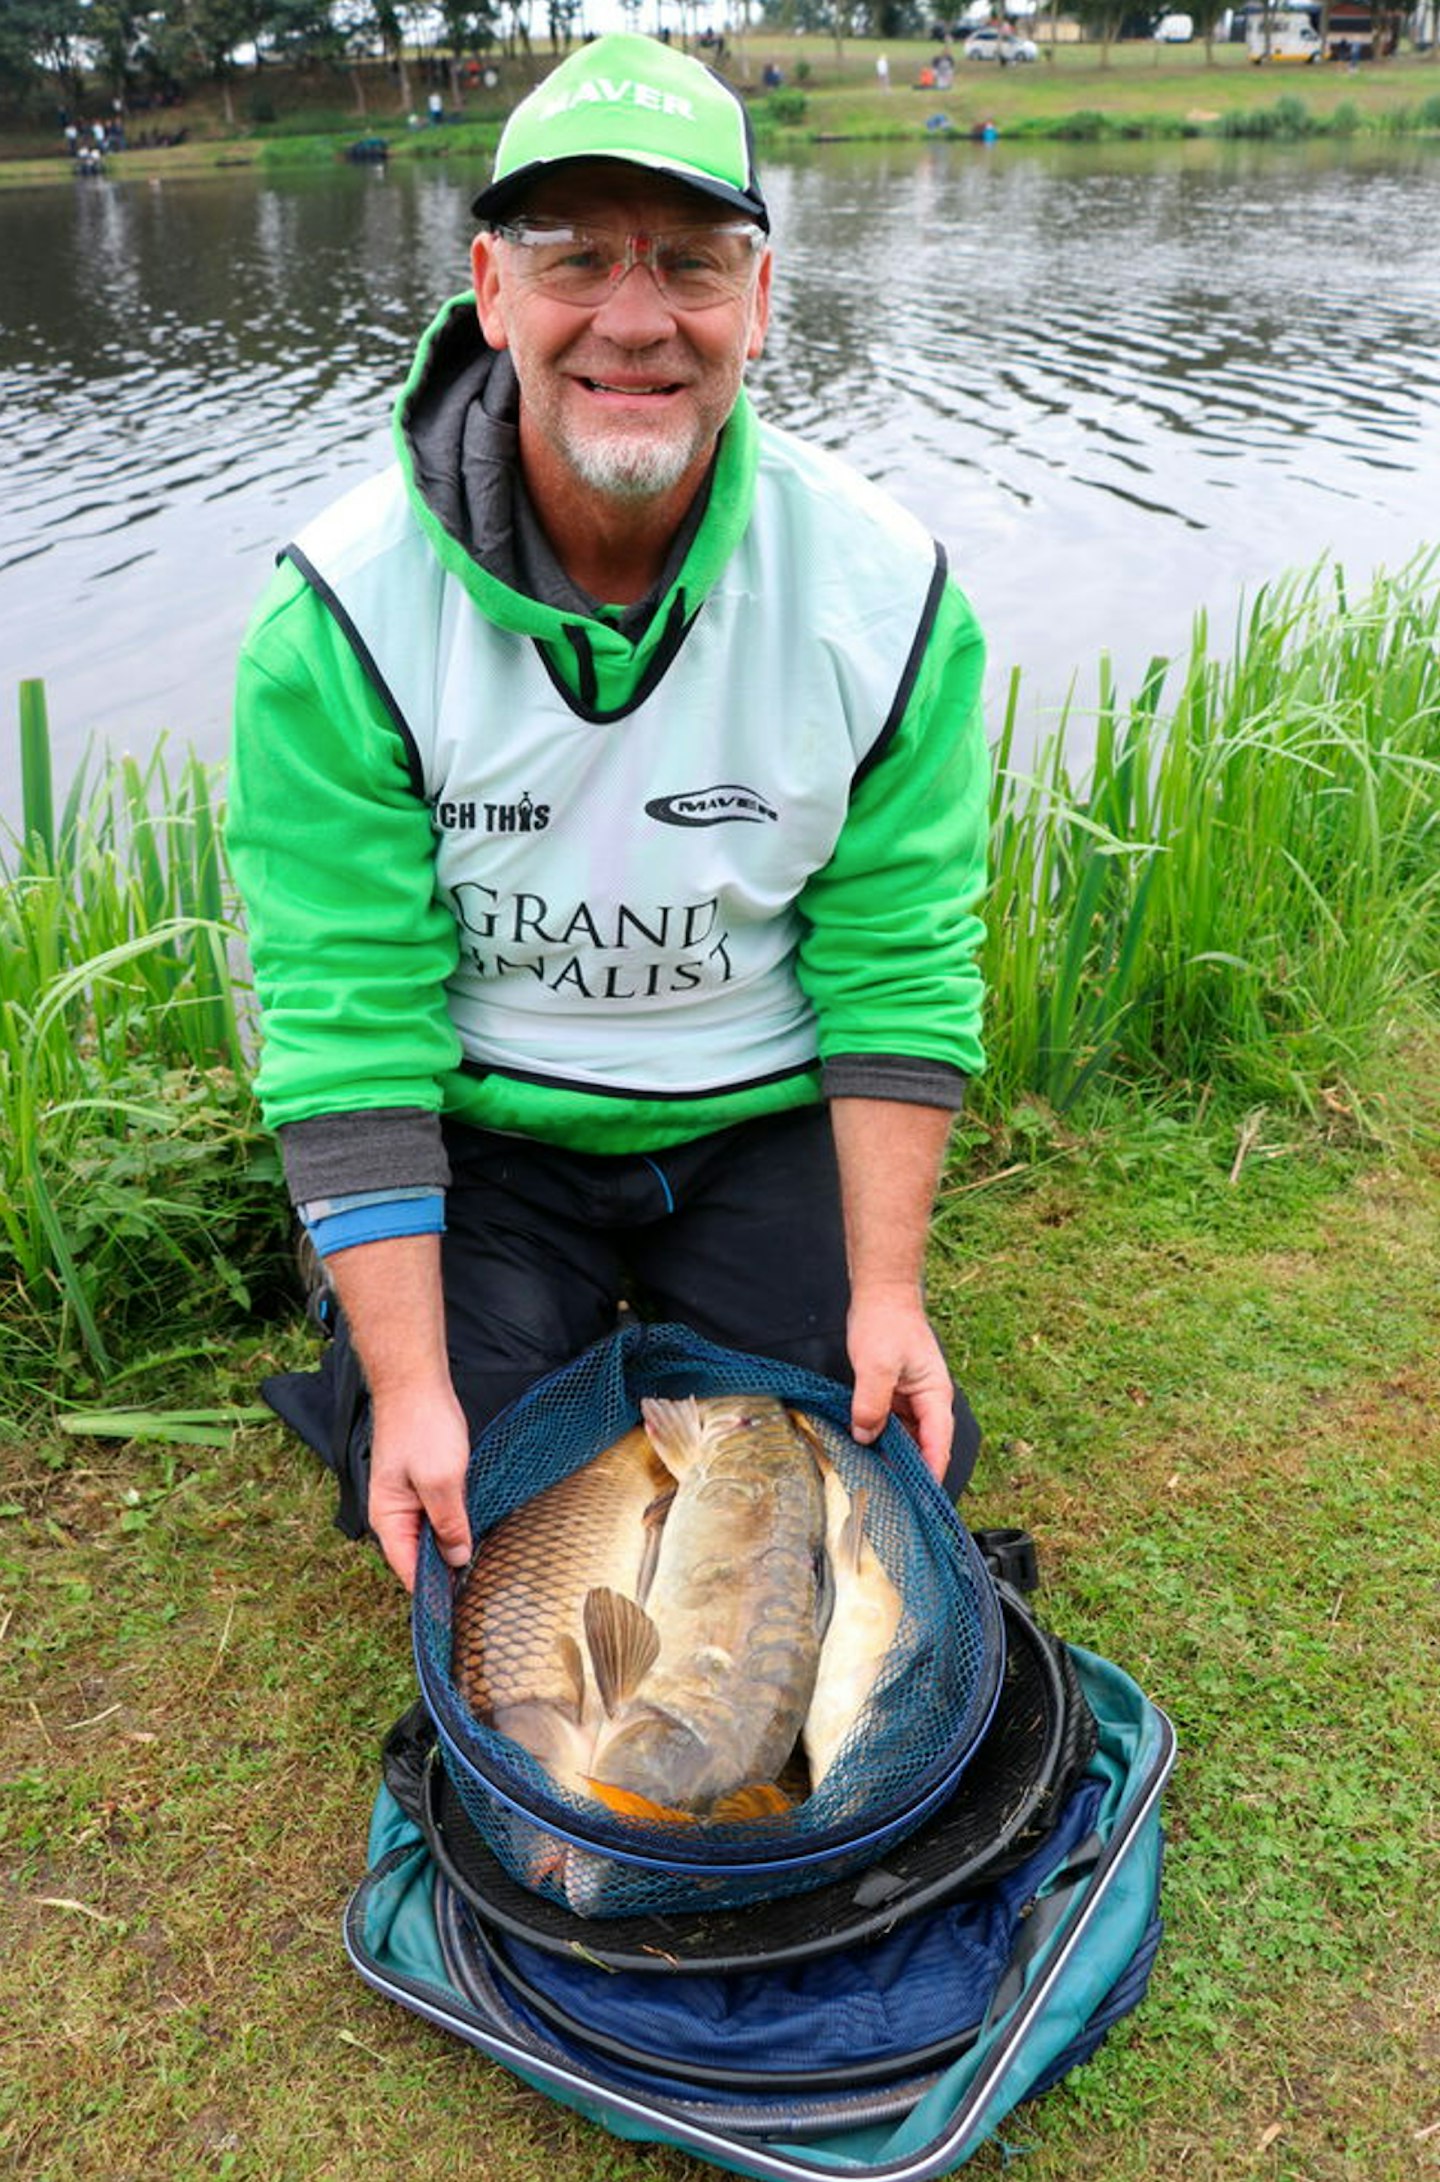 Simon banked 23-350 of carp to win the match